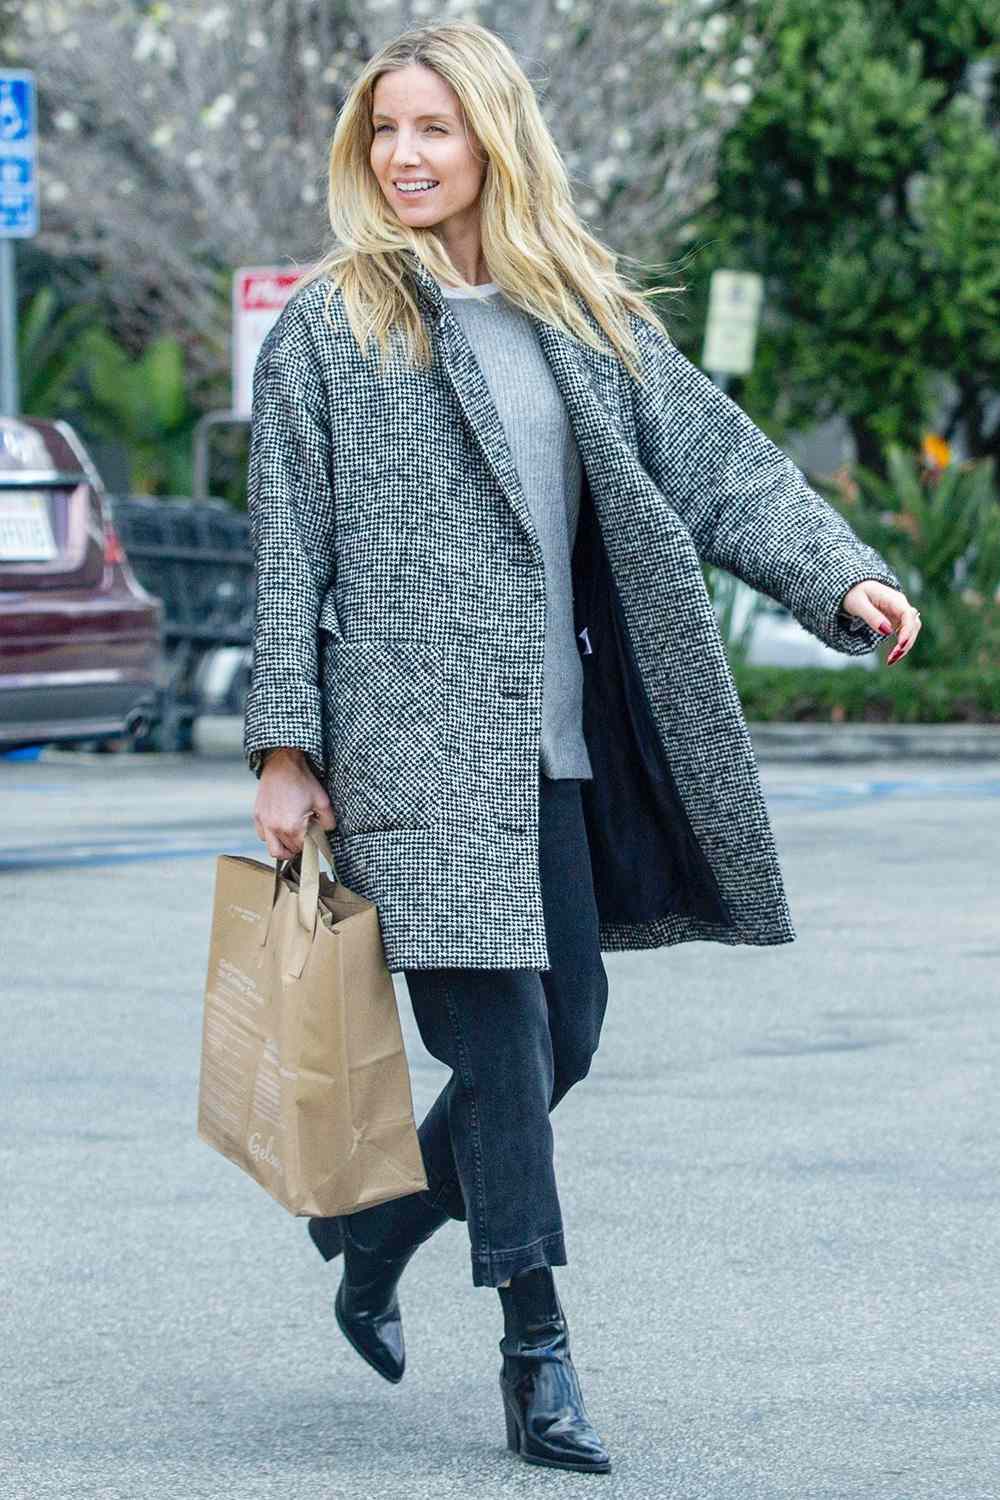 Chris Pine goes grocery shopping at Gelson's with girlfriend Annabelle Wallis